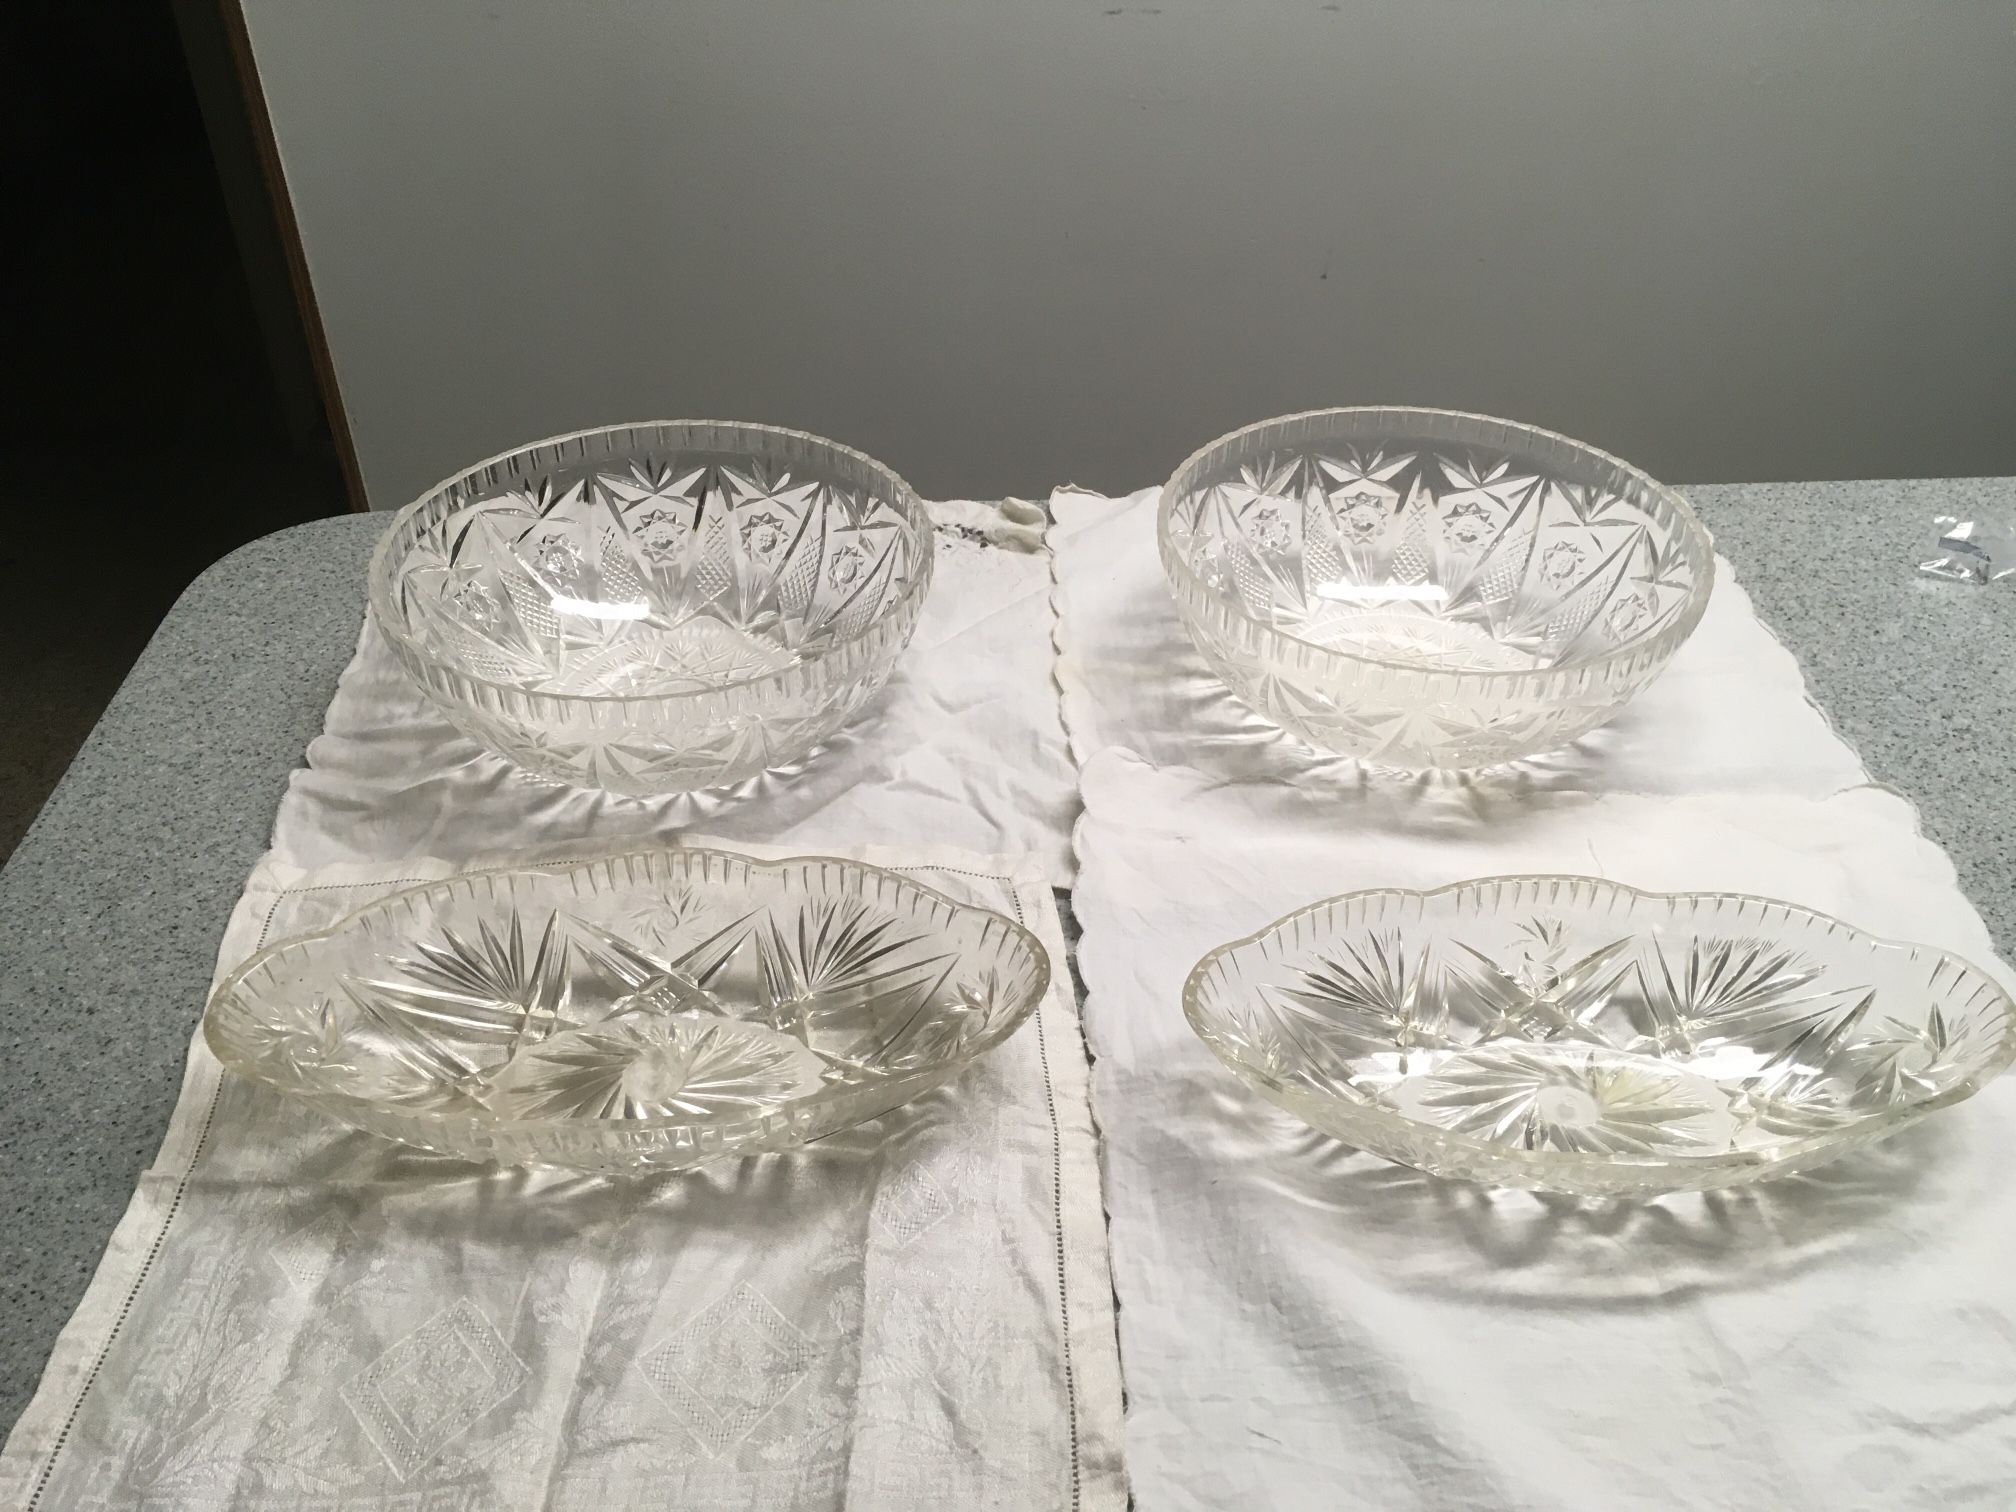 Party Bowls And Trays Cut Plastic To Look Like Cut Crystal 